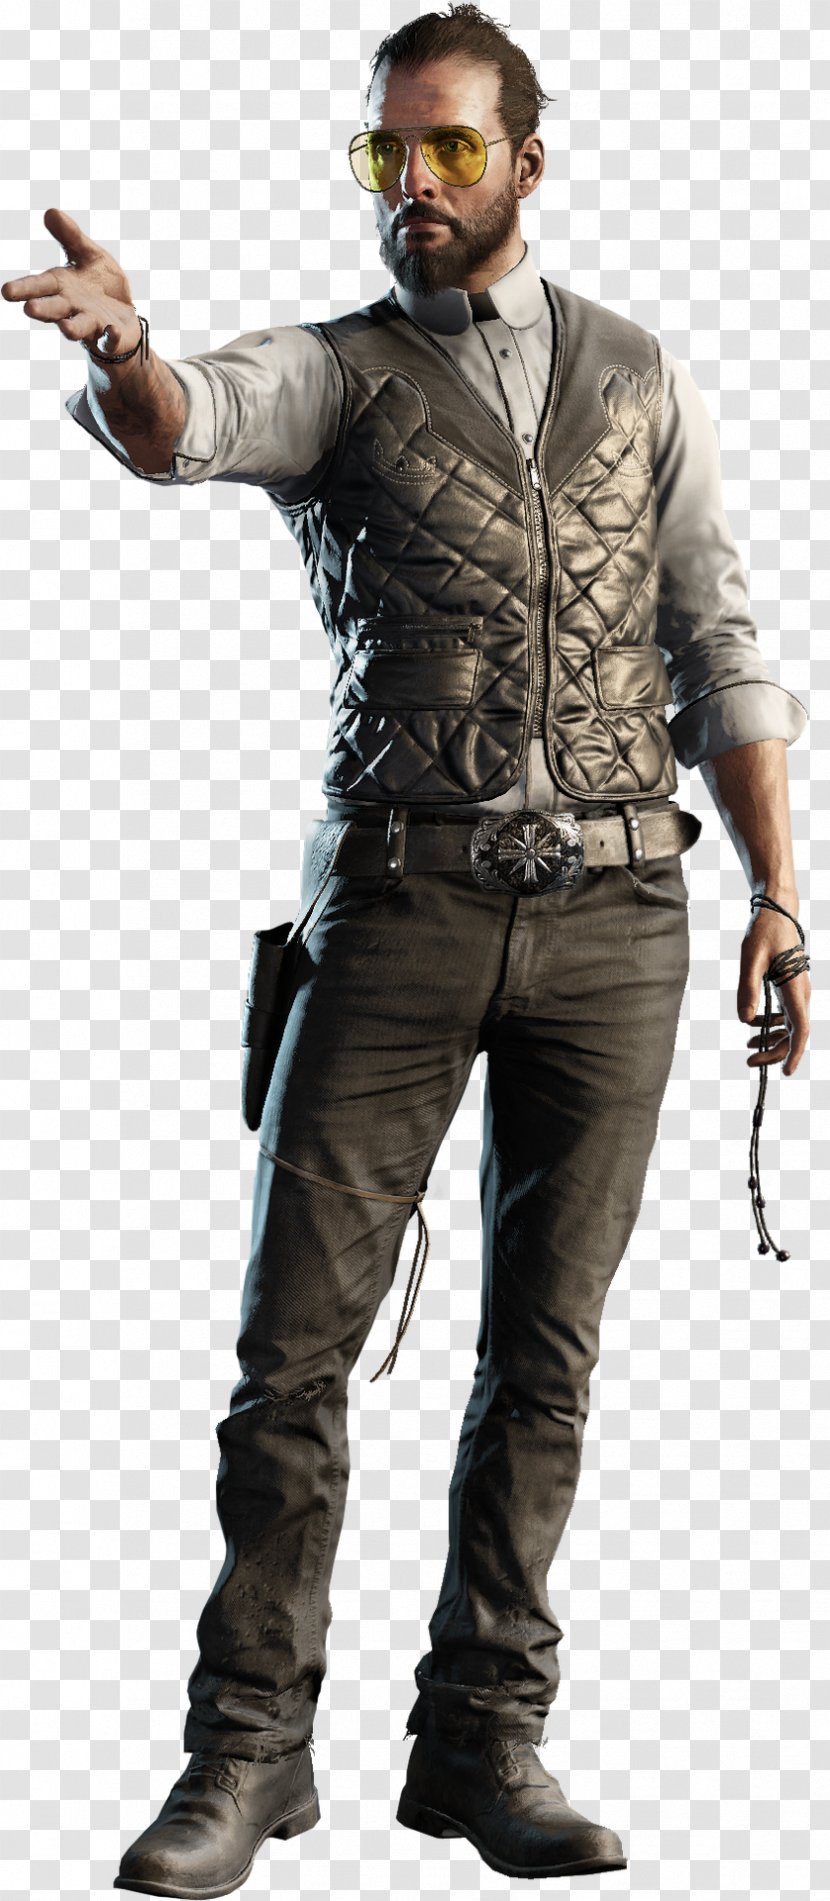 Far Cry 5 Video Games Tracon Cult Image - Seed - Ajay Ghale 4 Transparent PNG